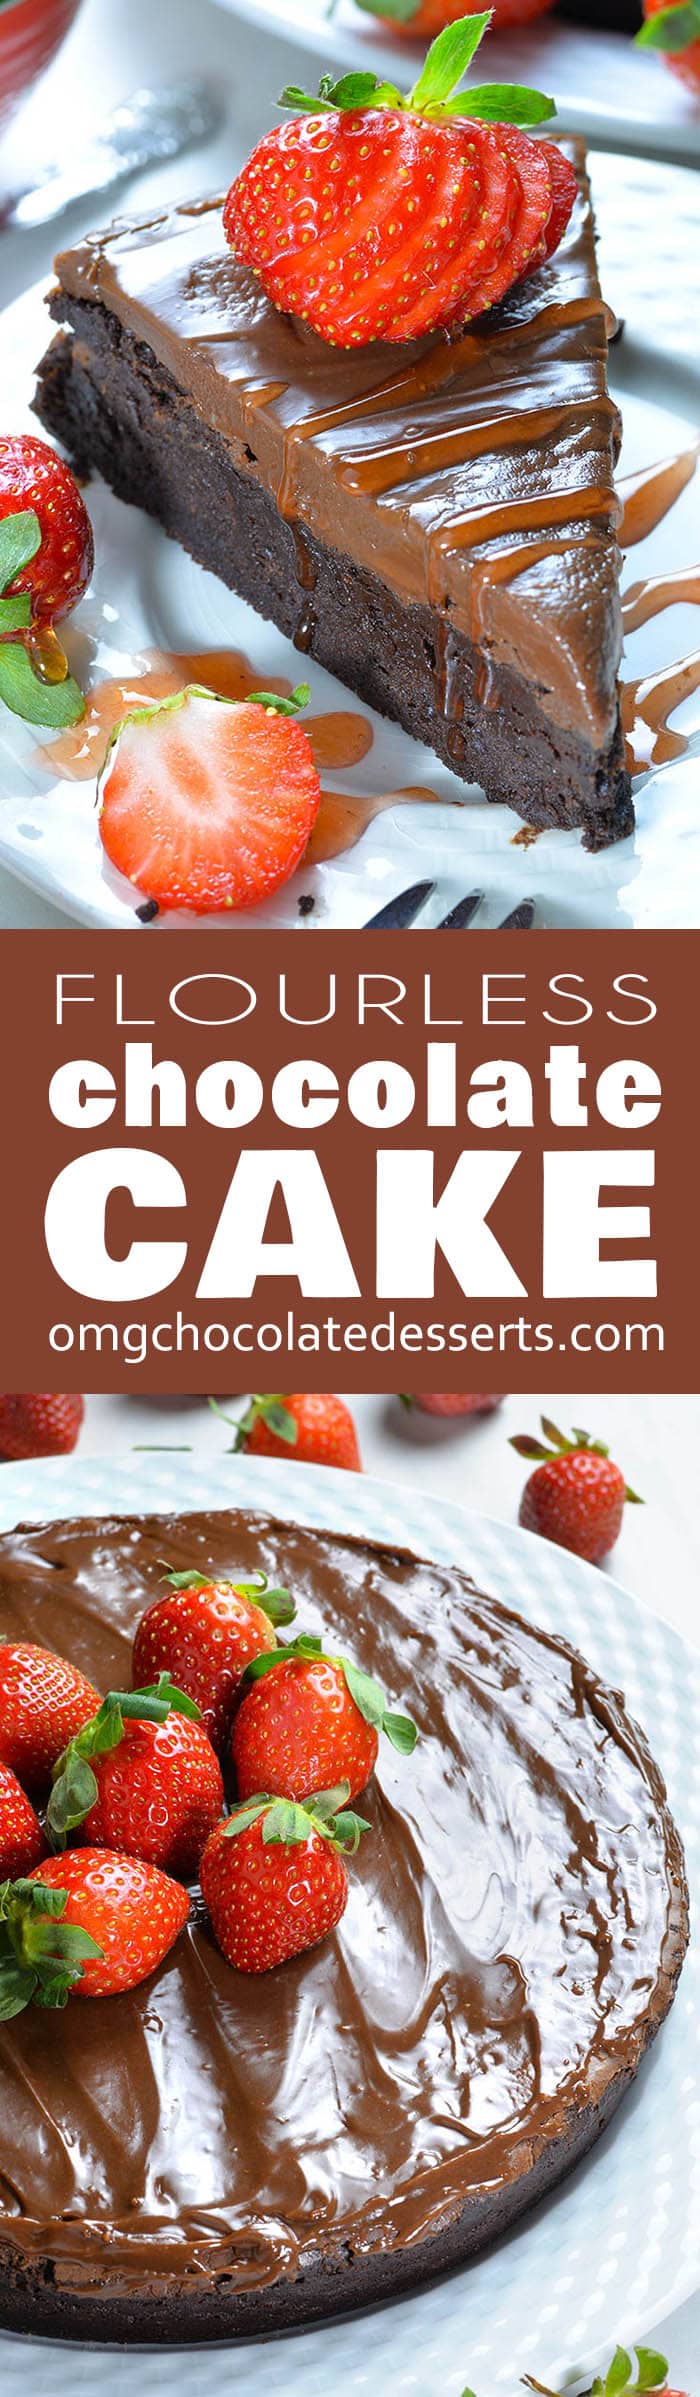 Flourless Chocolate Cake is the best  and the most decadent chocolate cake I’ve ever tried!!! Every single bite of this cake is extremely rich and fudgy and chocolate glaze takes it over the top!